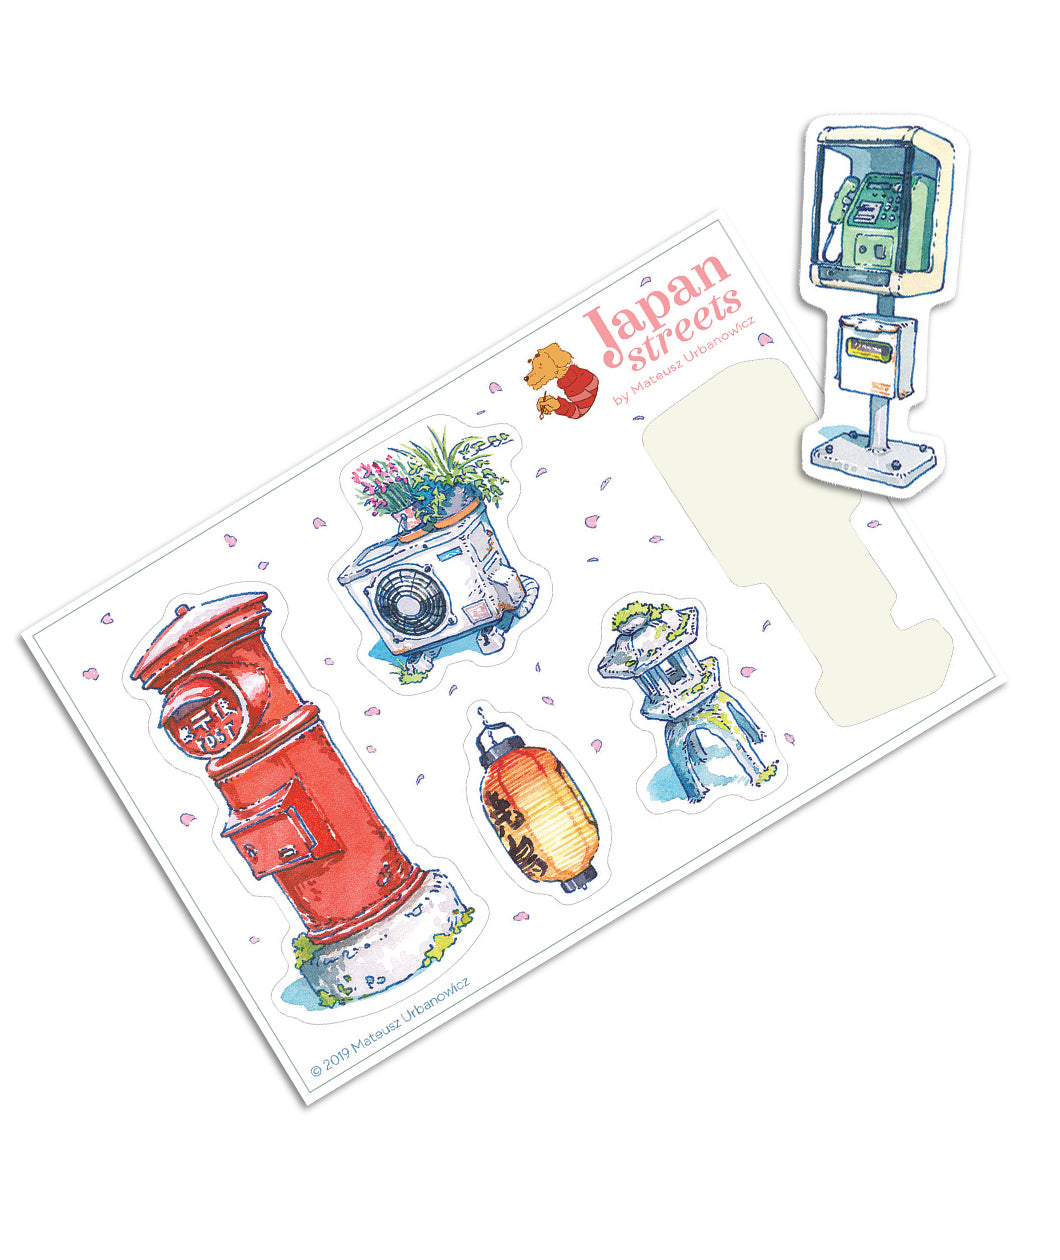 Sticker sheet with five different watercolor stickers from Mateusz Urbanowicz. One sticker is a fire hydrant, one is a lantern, one is a standing phone booth, one looks like a radiator and one is a garden sculpture.